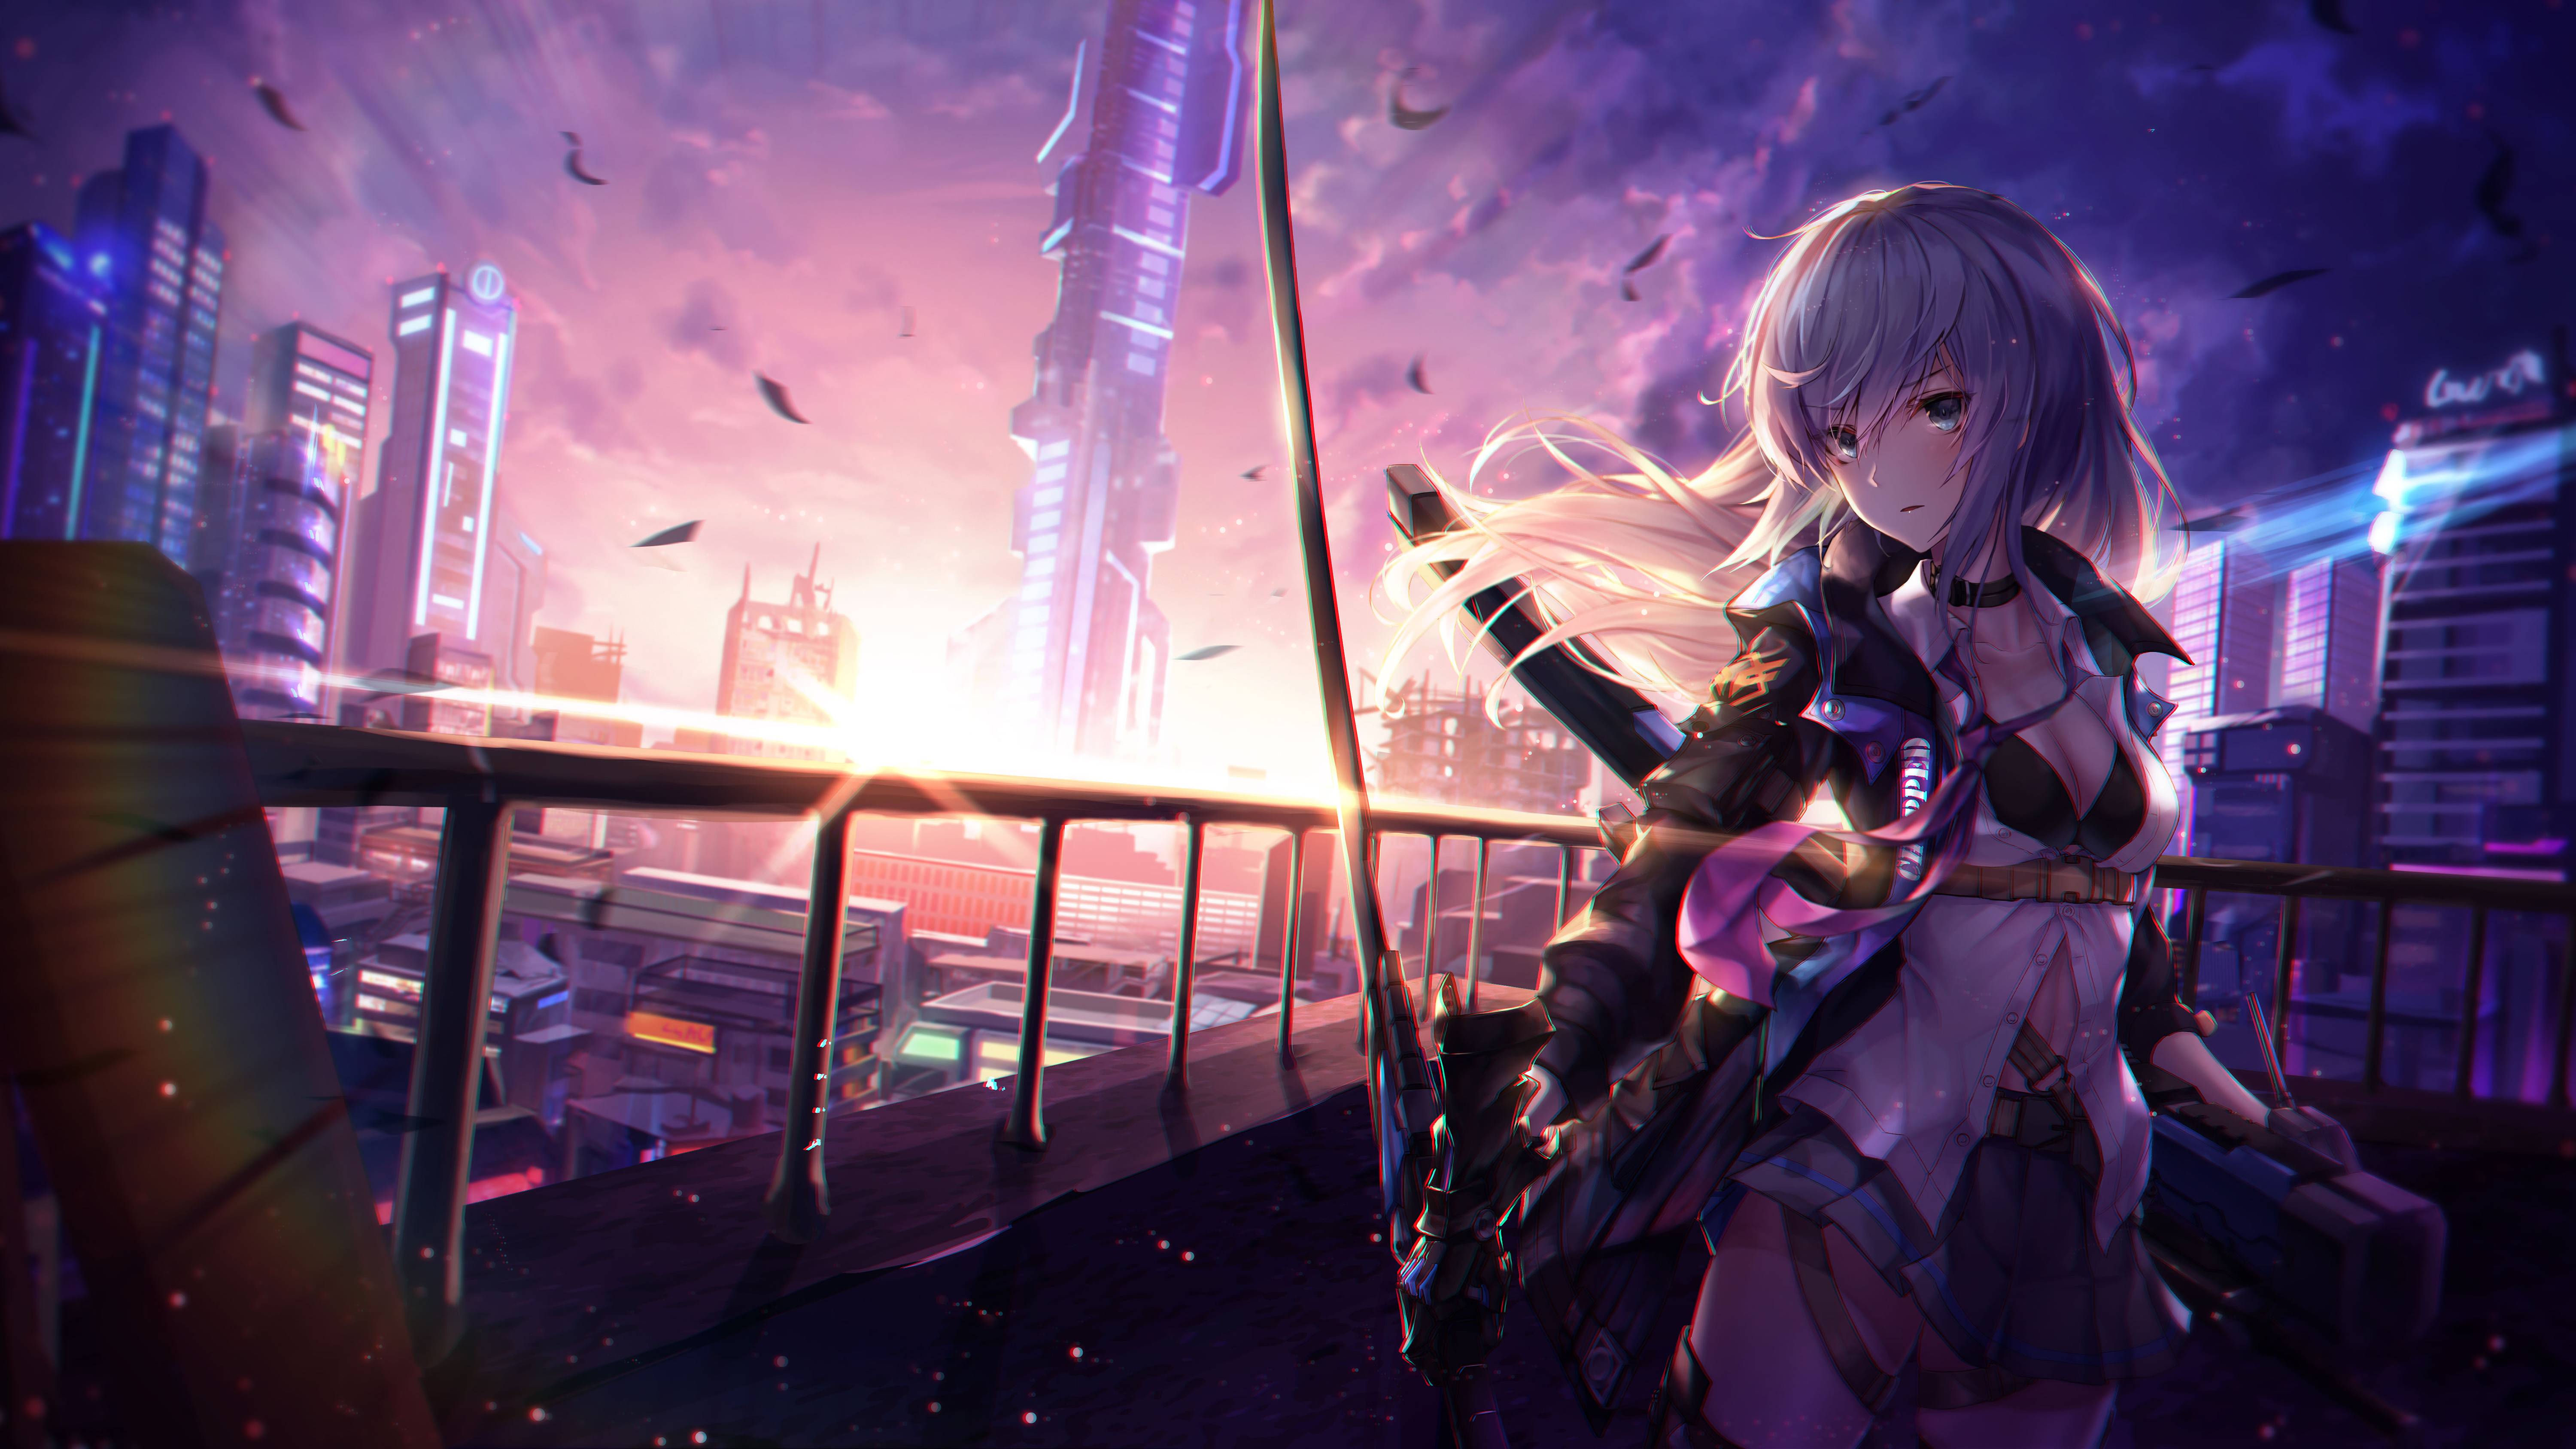 Anime 8k Wallpapers - Top Free Anime 8k Backgrounds ...